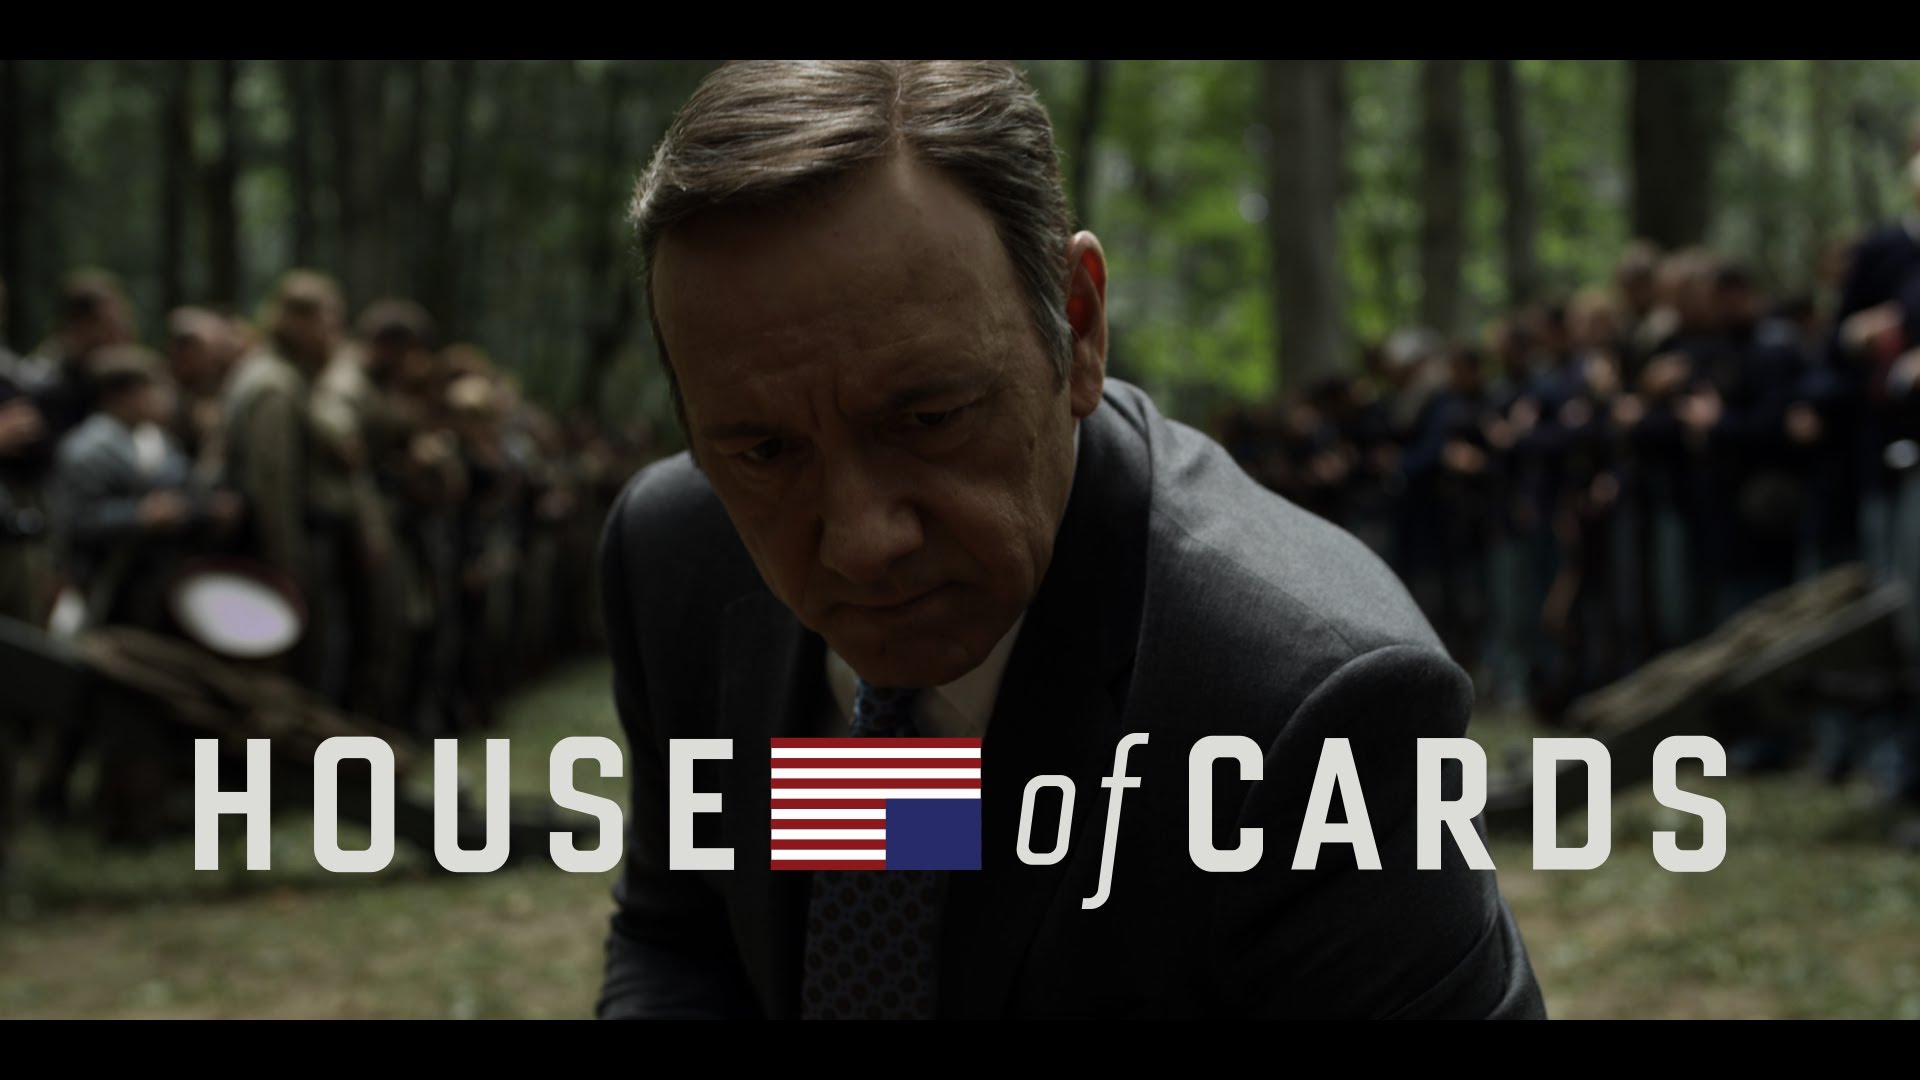 House Of Cards Cast Image Wallpaper